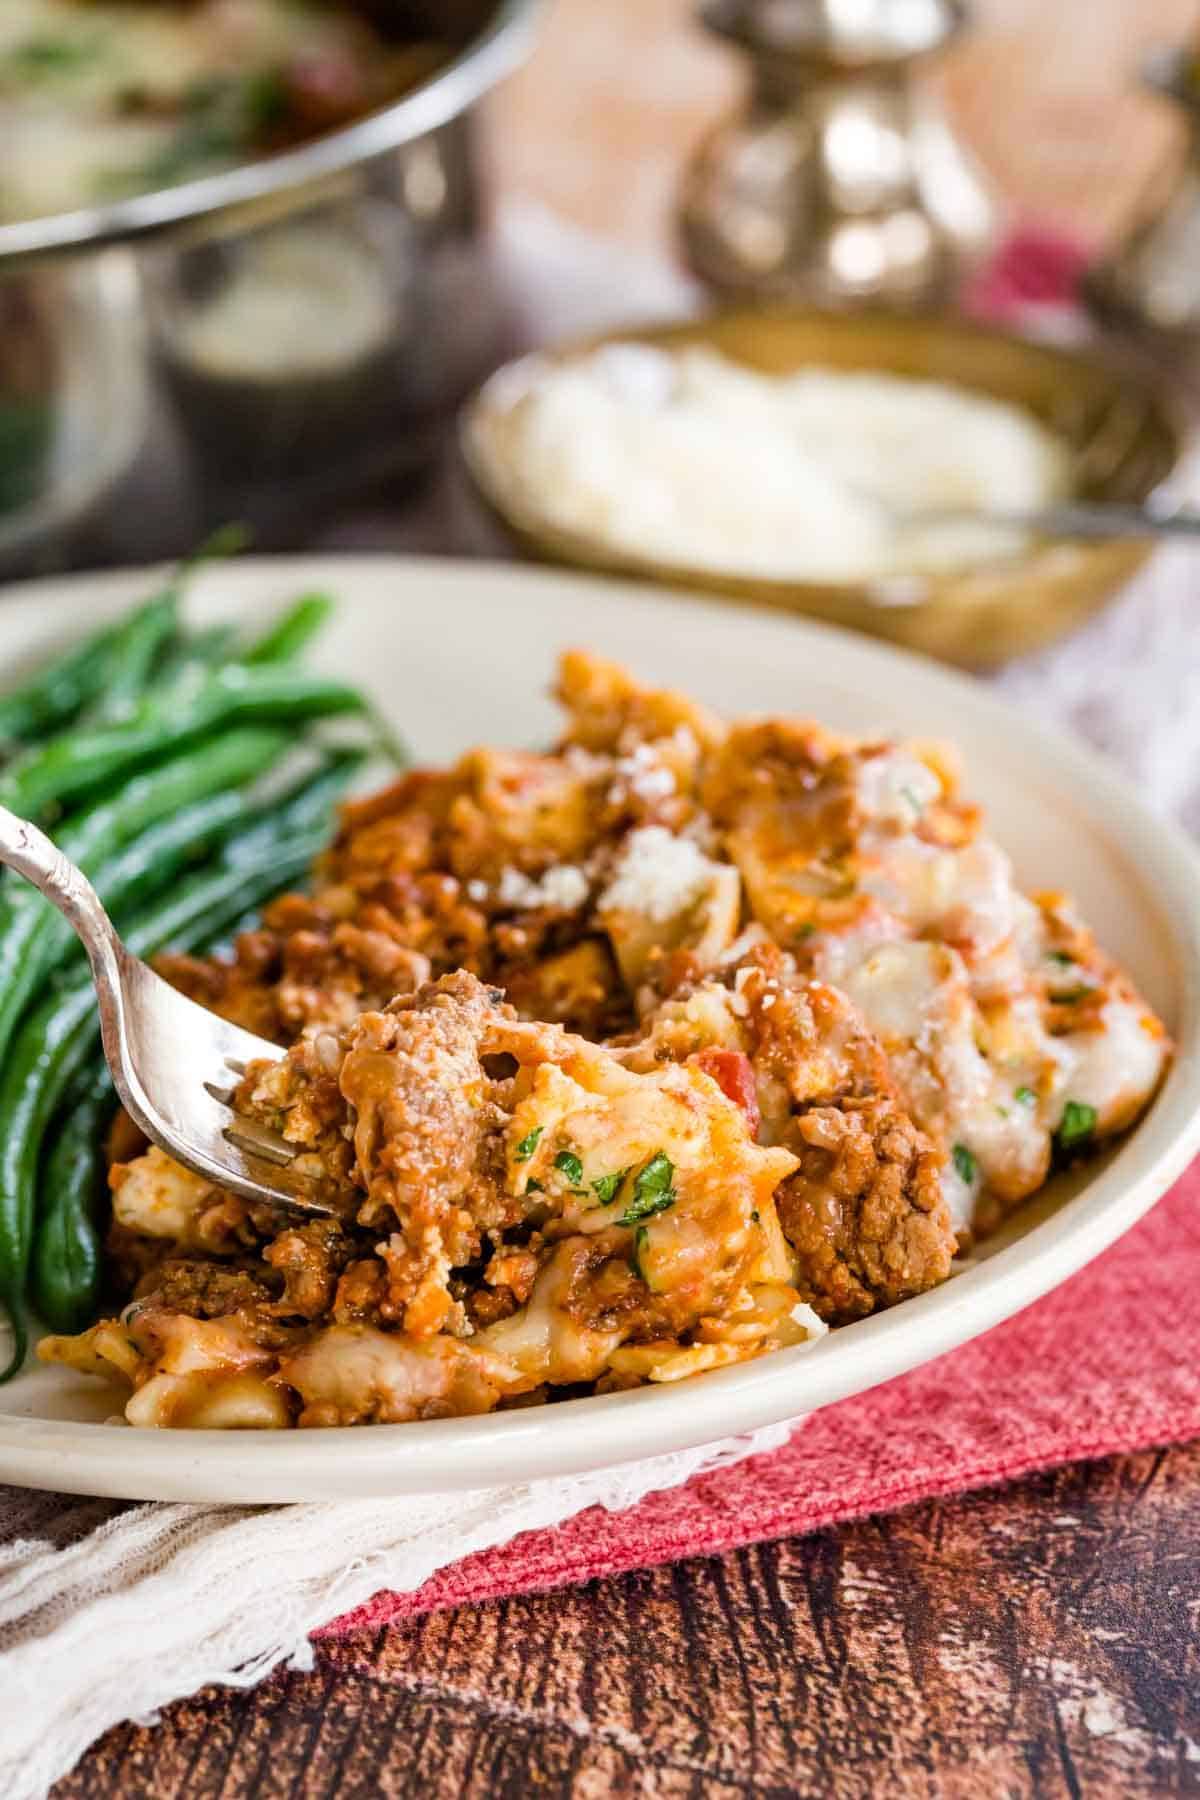 A fork stuck into a serving of gluten-free skillet lasagna on a plate next to green beans.